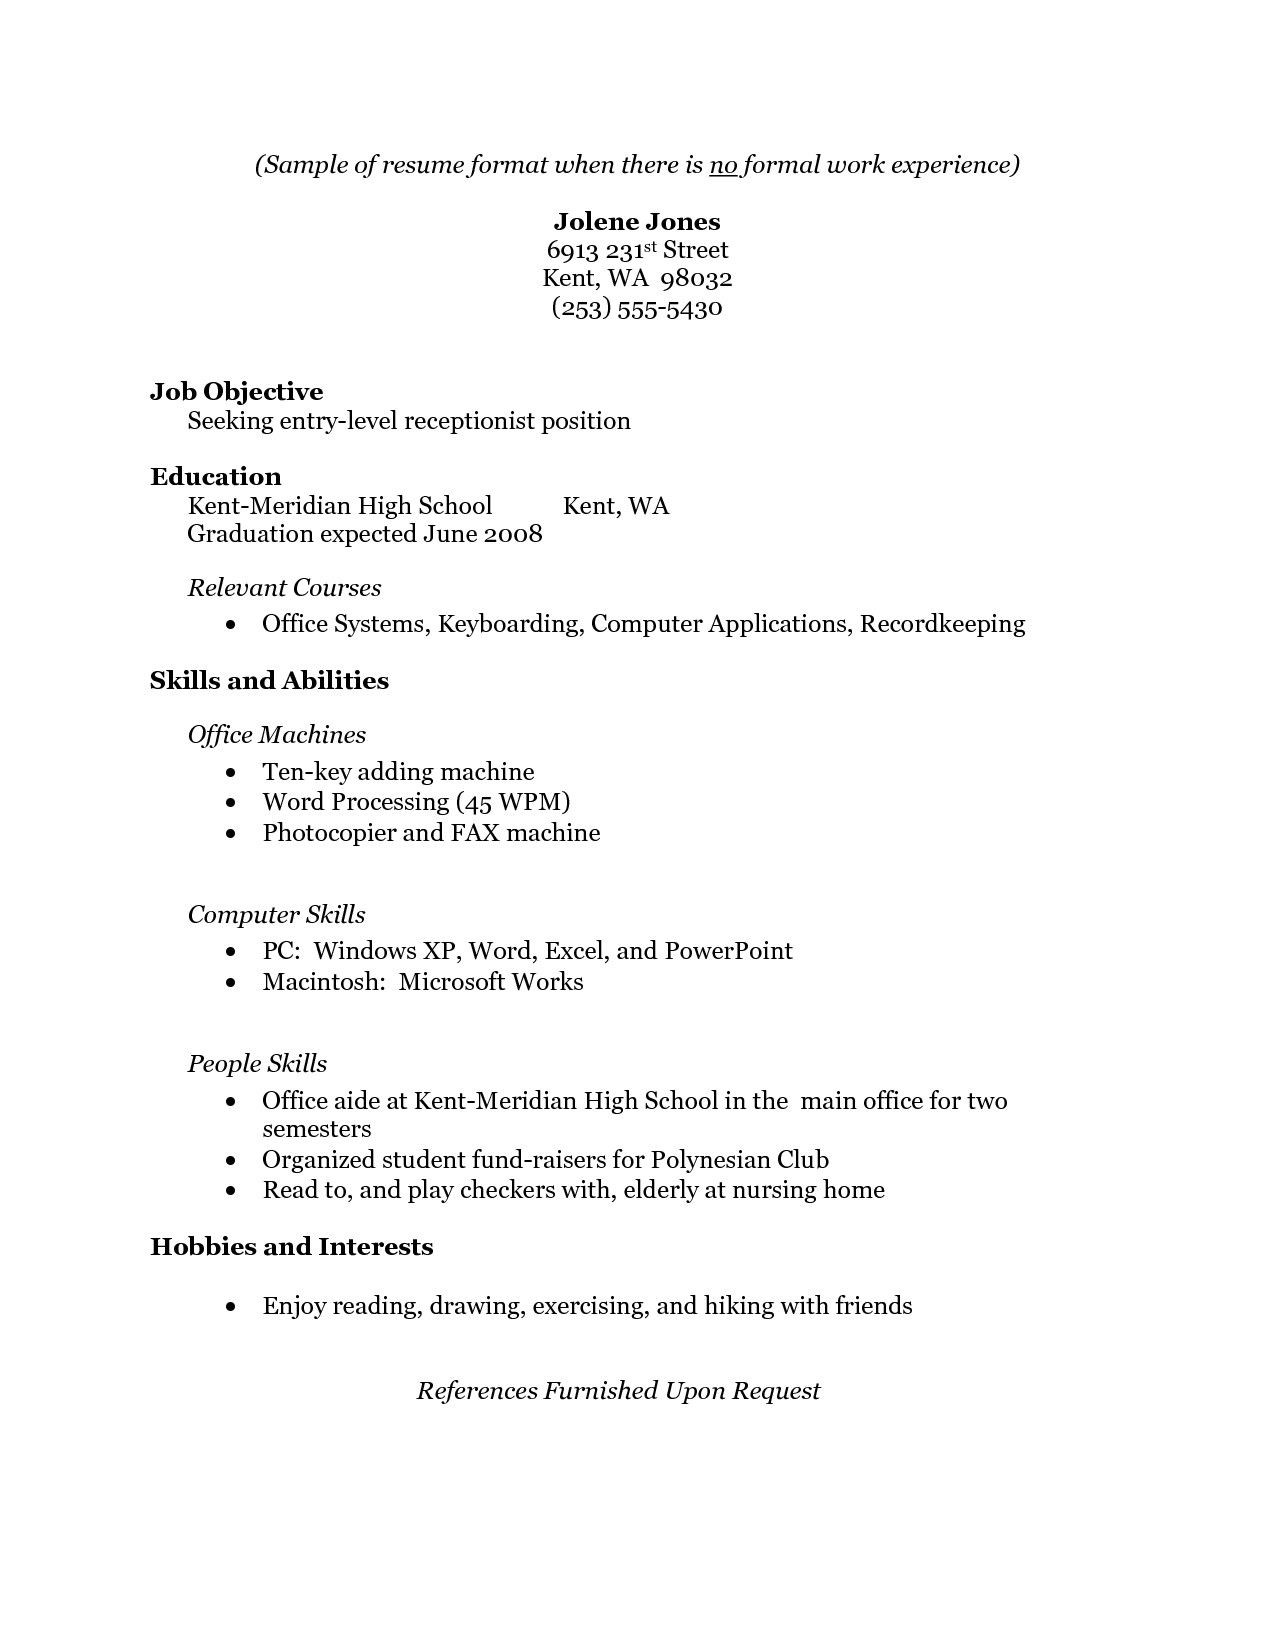 Best Resume Template for No Work Experience Free Resume Templates No Work Experience #experience …